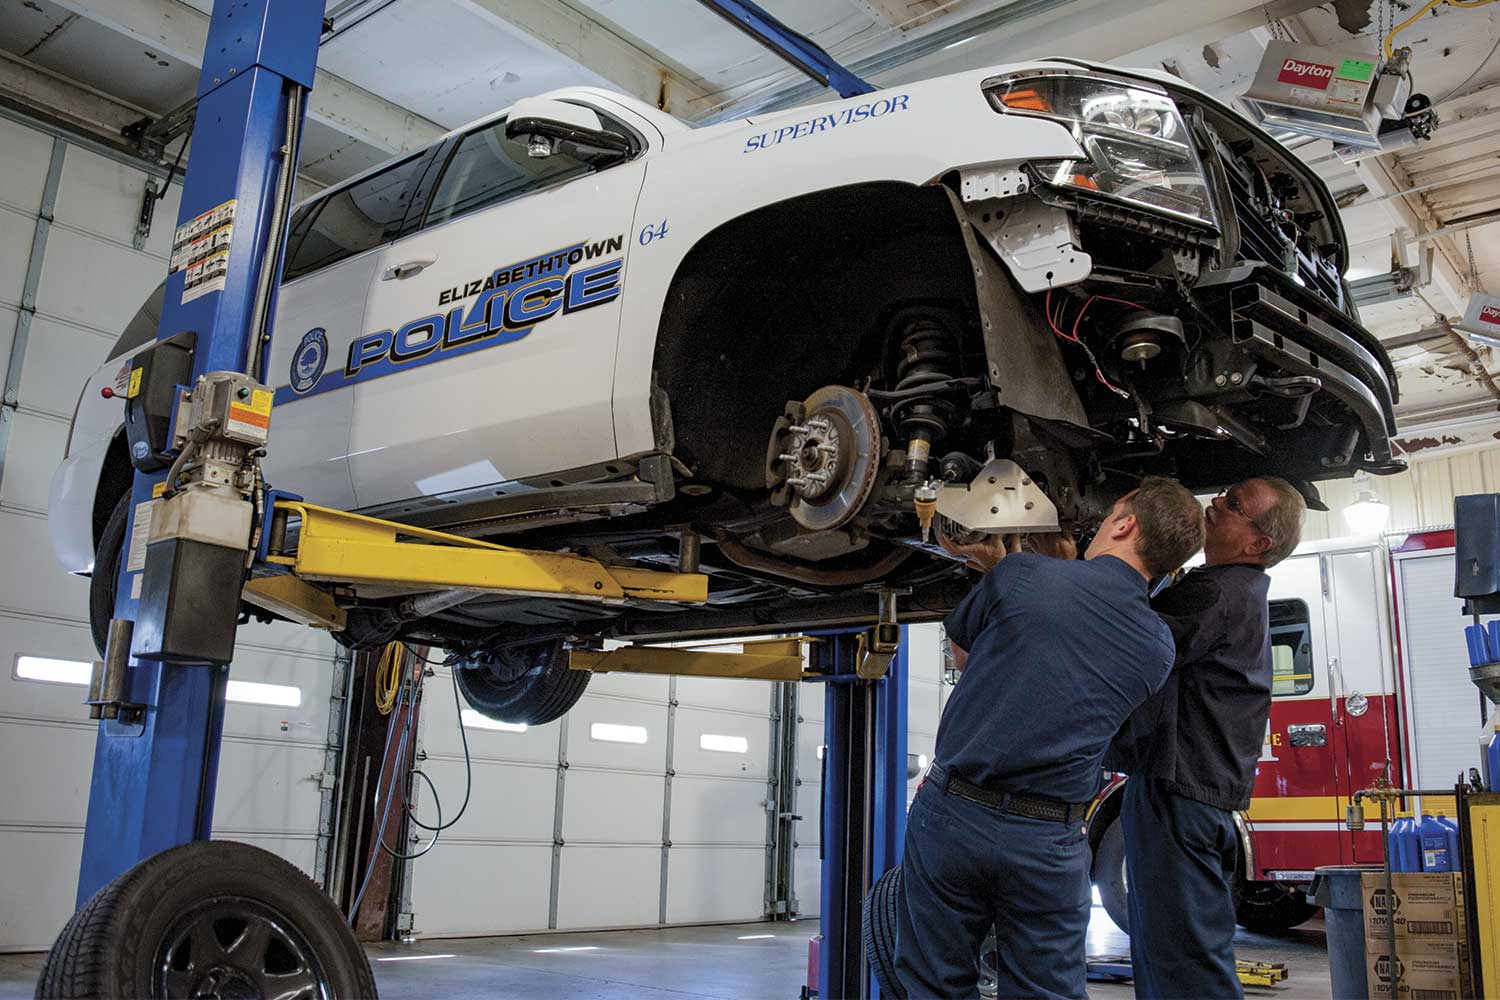  Unlike most Kentucky law enforcement agencies, Elizabethtown has its own Public Safety Garage inside the police department. PSG staff are responsible for vehicle maintenance, striping and repairing all police and fire vehicles. (Photo by Jim Roberts